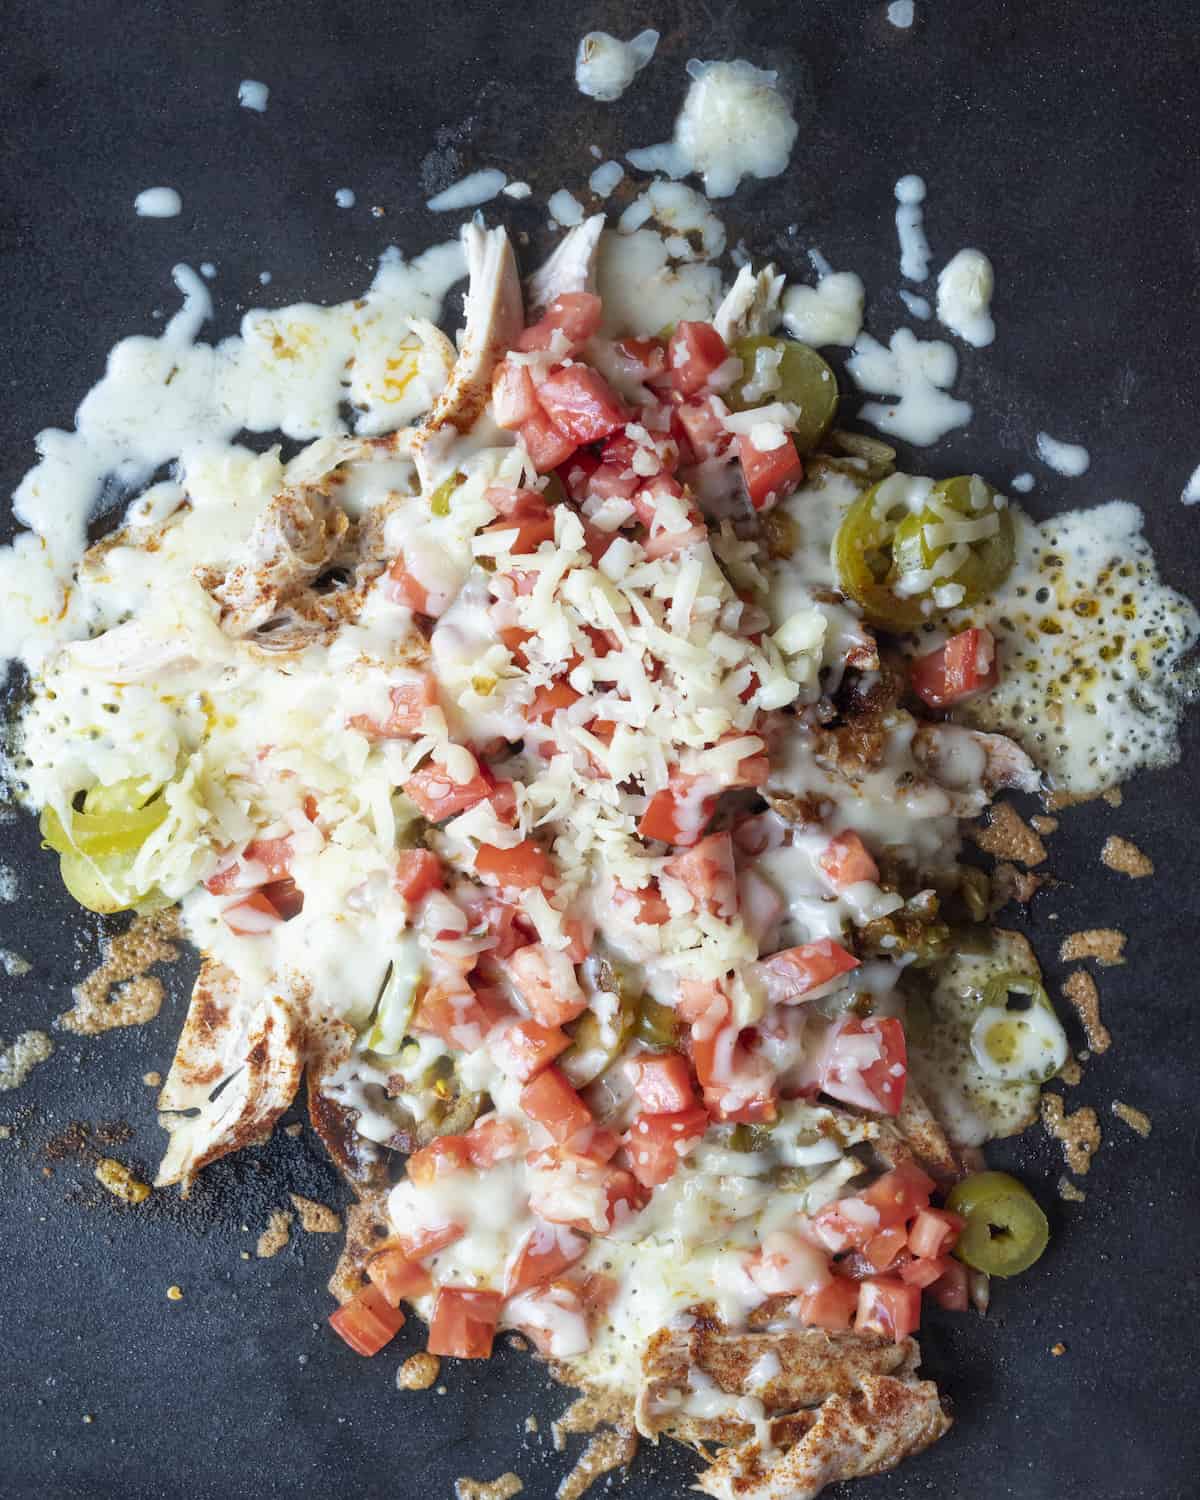 Shredded rotisserie chicken on a griddle mixed with chopped green chiles and pickled jalapeños and taco seasoning topped with shredded cheese and diced tomatoes.